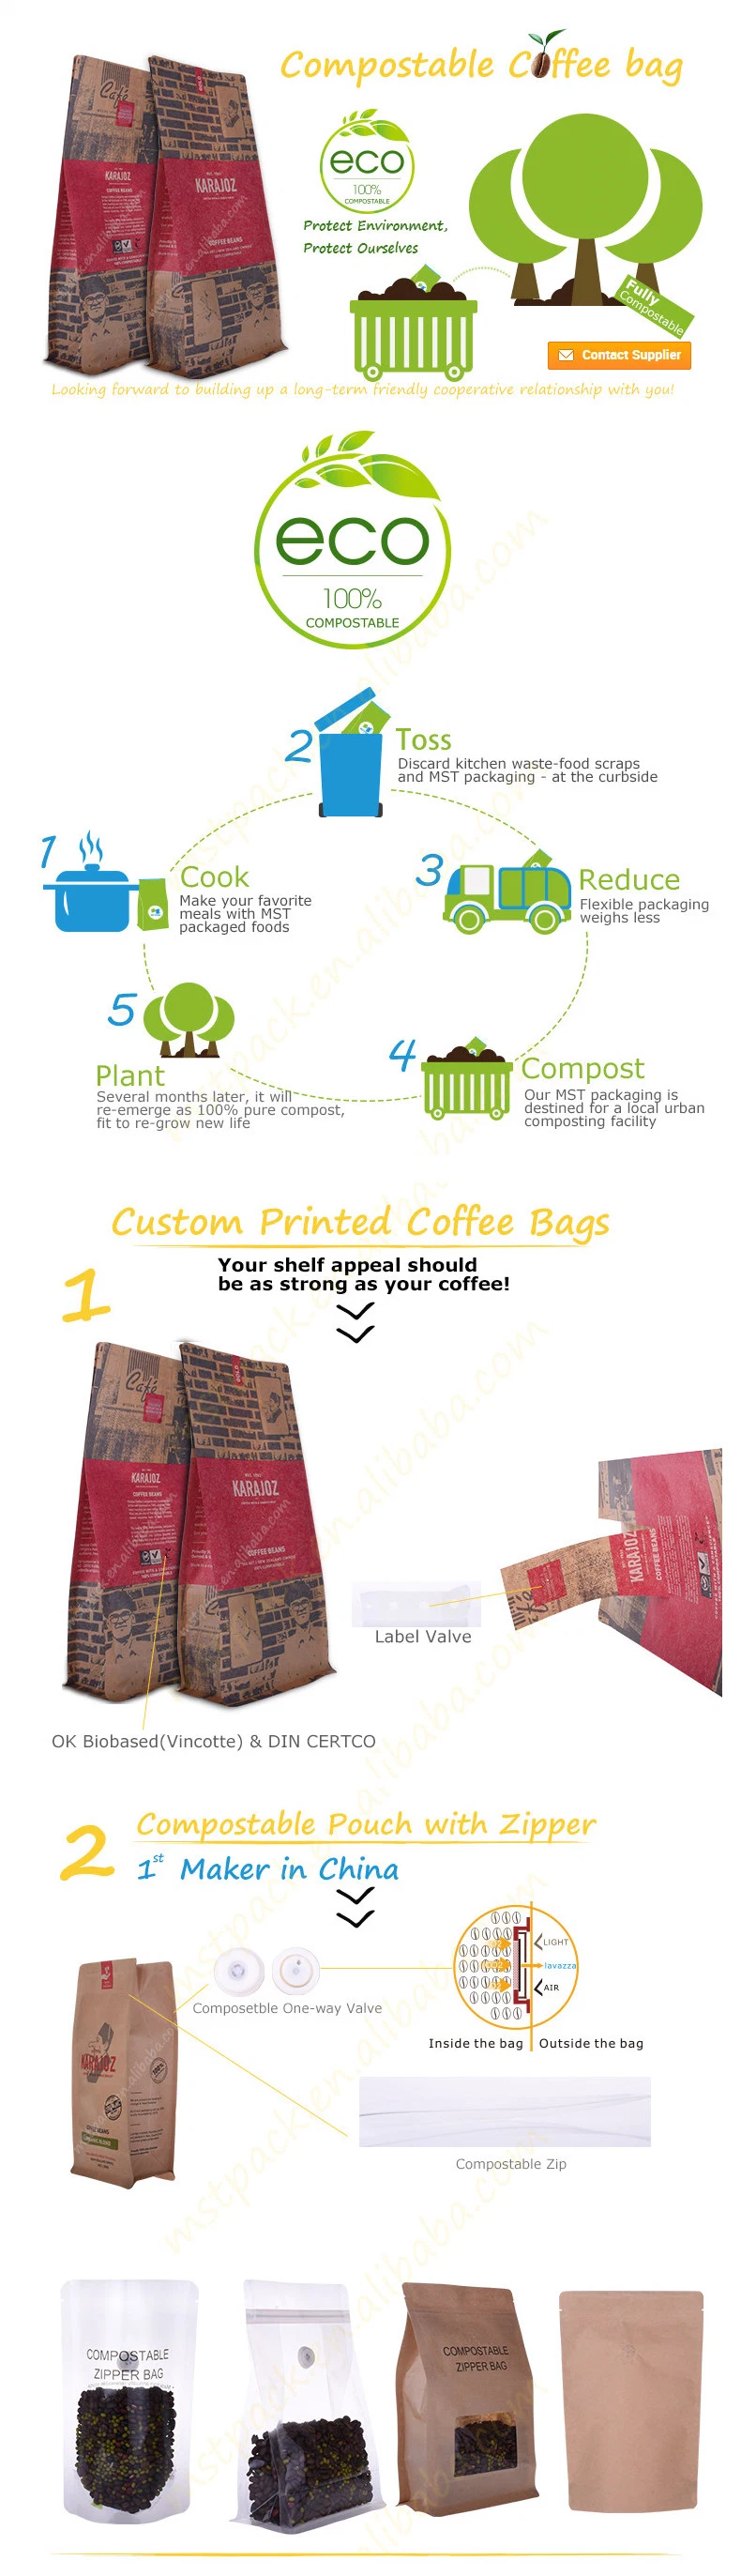 500g Biodegradable Box Bottom Coffee Pack with Pocket Zipper